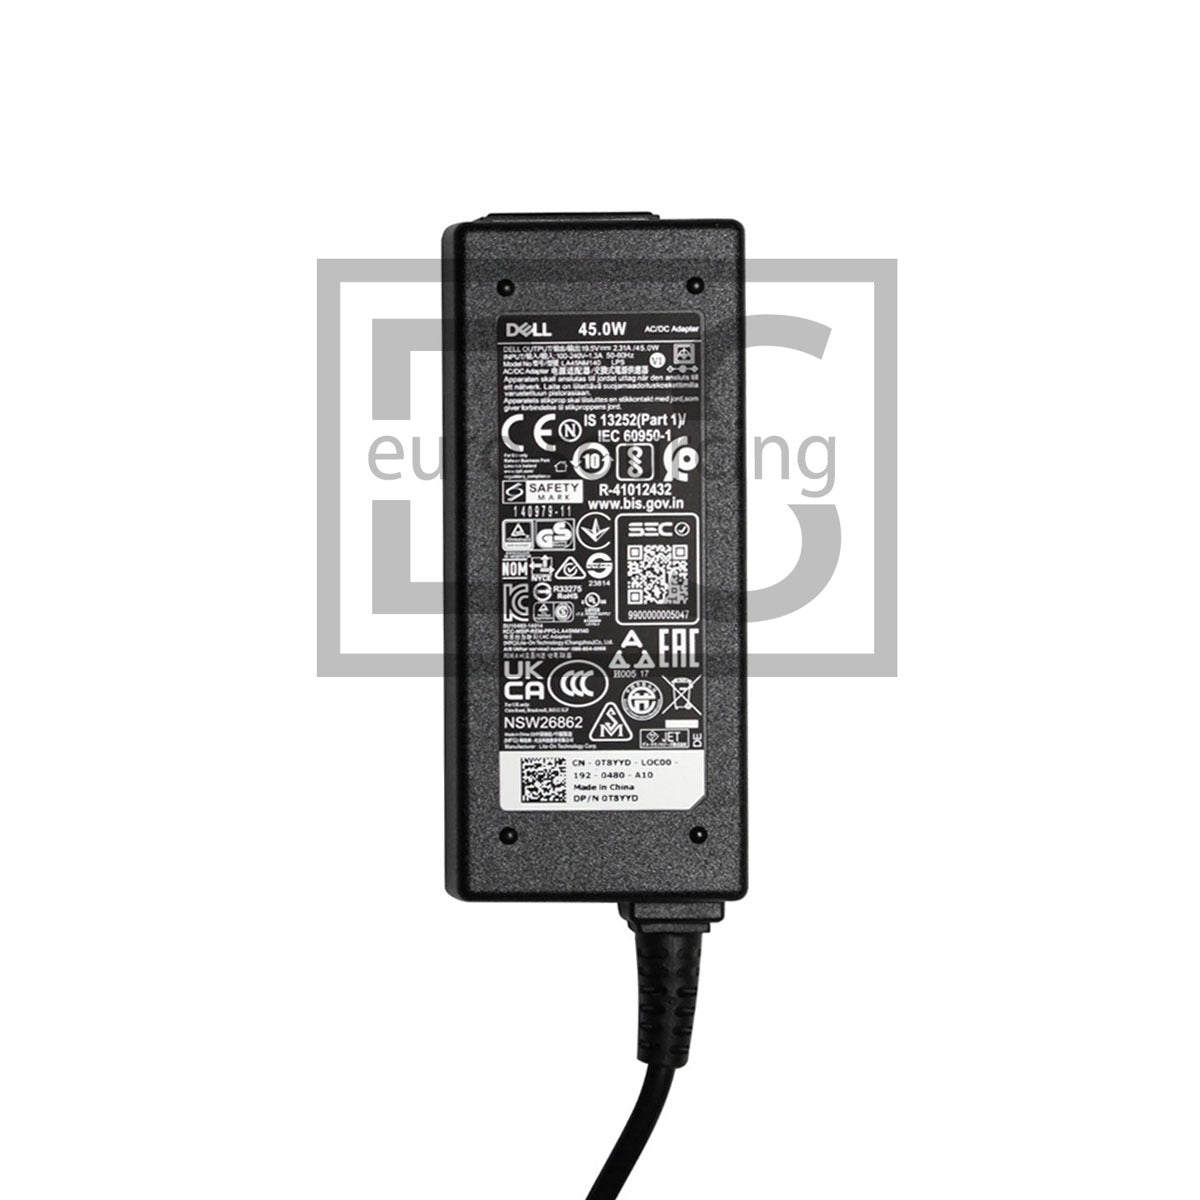 Genuine DELL 19.5V 2.31A DELC231 *ROUND* TYPE DELL BRAND 45W AC ADAPTER 4.5MM x 3.0MM Compatible With DELL XPS 9316